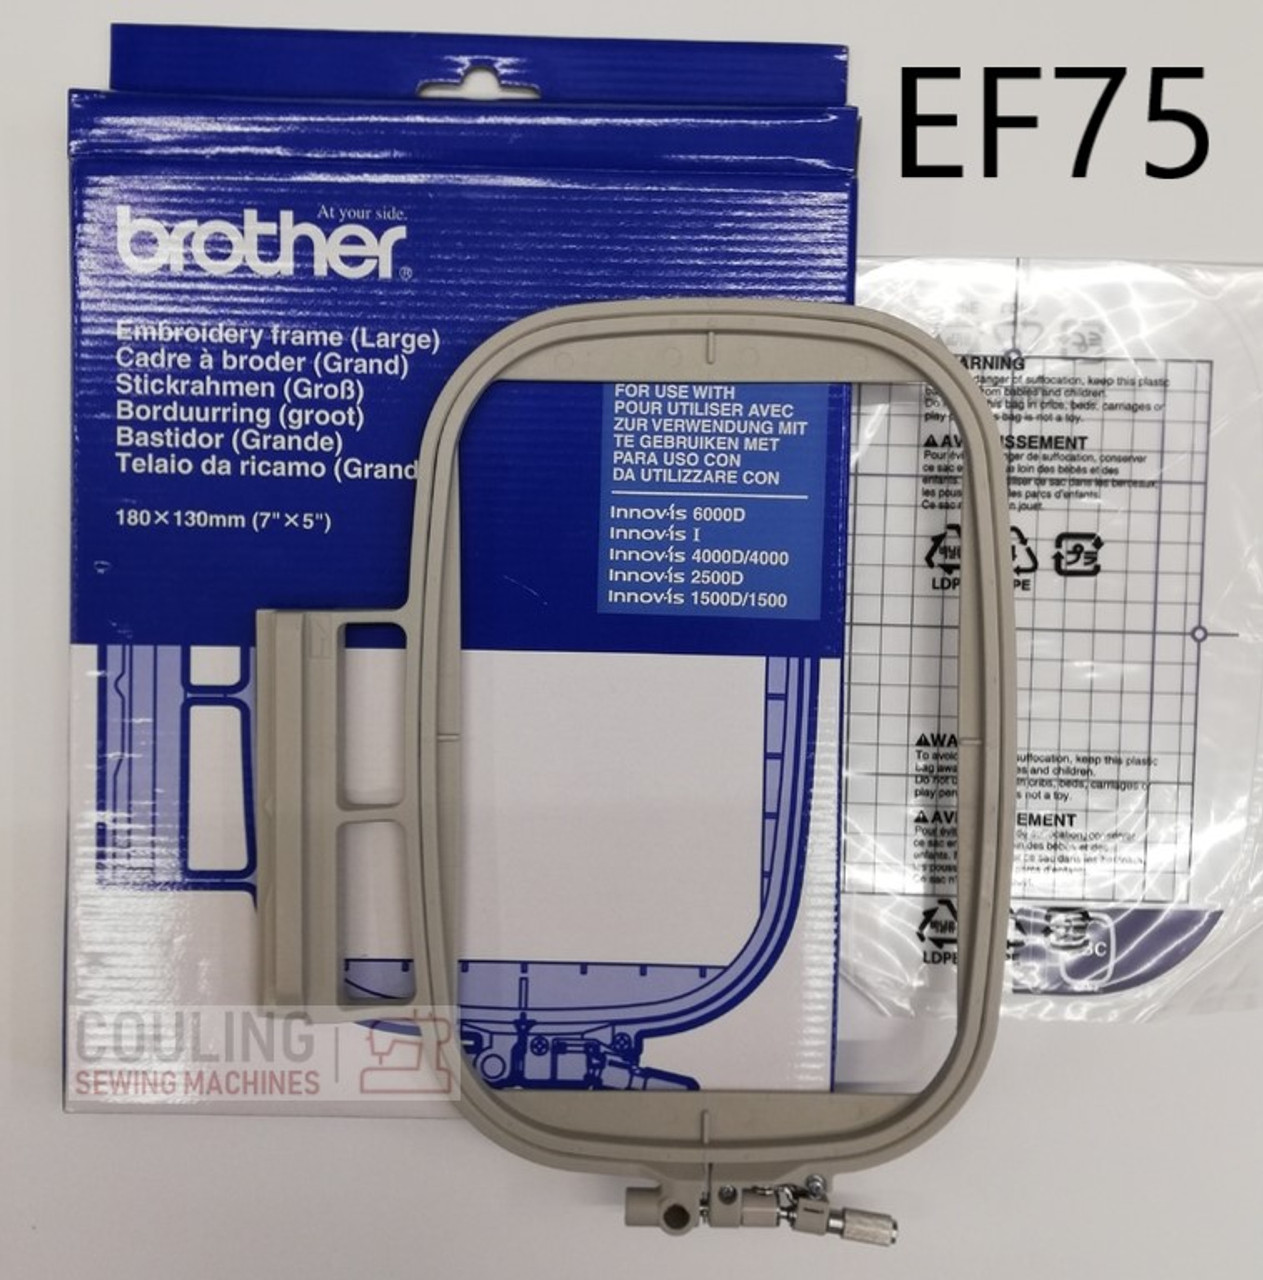 Spares & Accessories - BROTHER - Embroidery Hoops and Frames - Page 1 -  Couling Sewing Machines